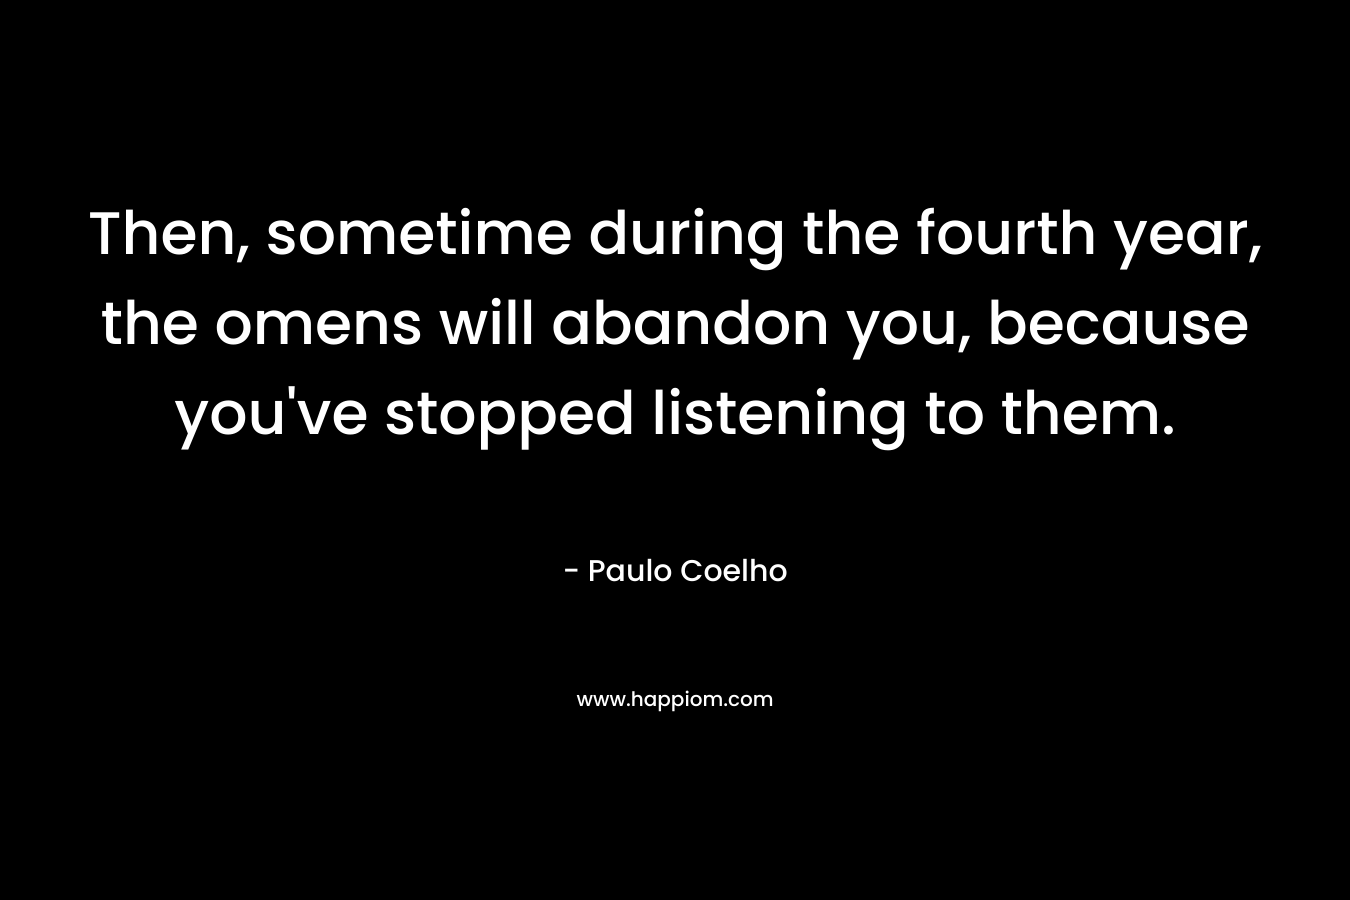 Then, sometime during the fourth year, the omens will abandon you, because you’ve stopped listening to them. – Paulo Coelho